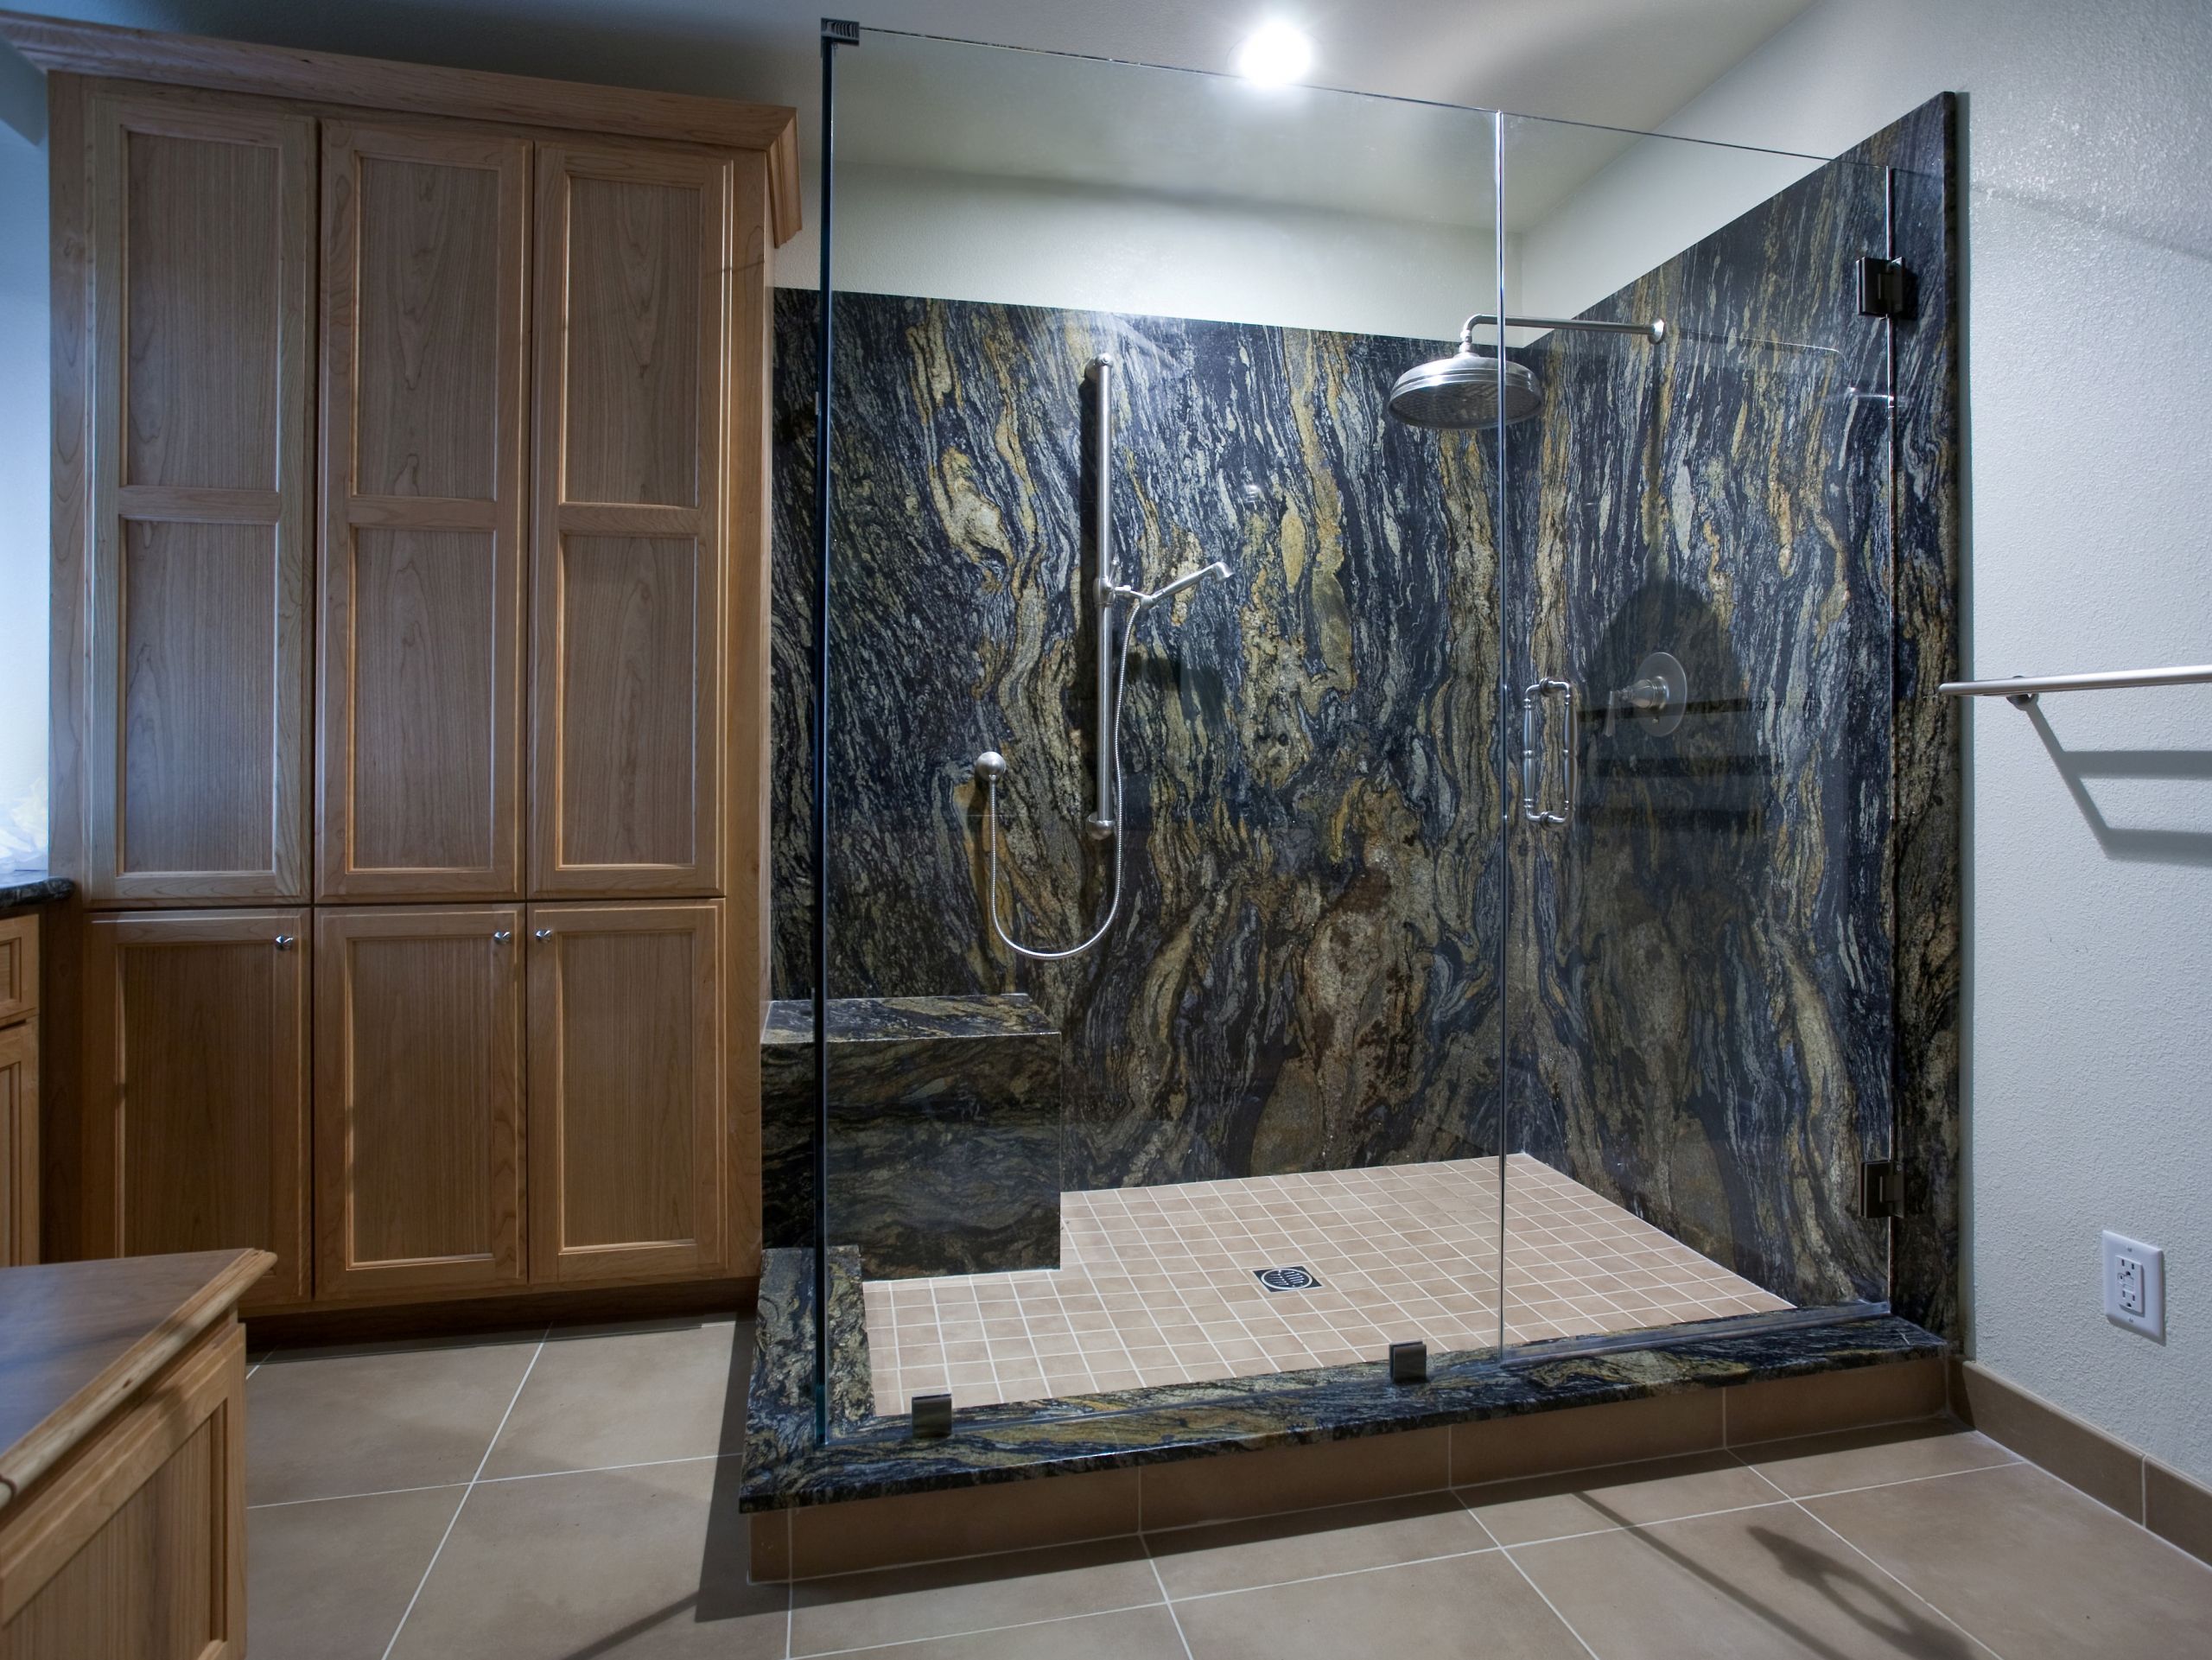 Bathroom Remodel Prices
 How Much Does a Bathroom Remodel Cost Setting Realistic